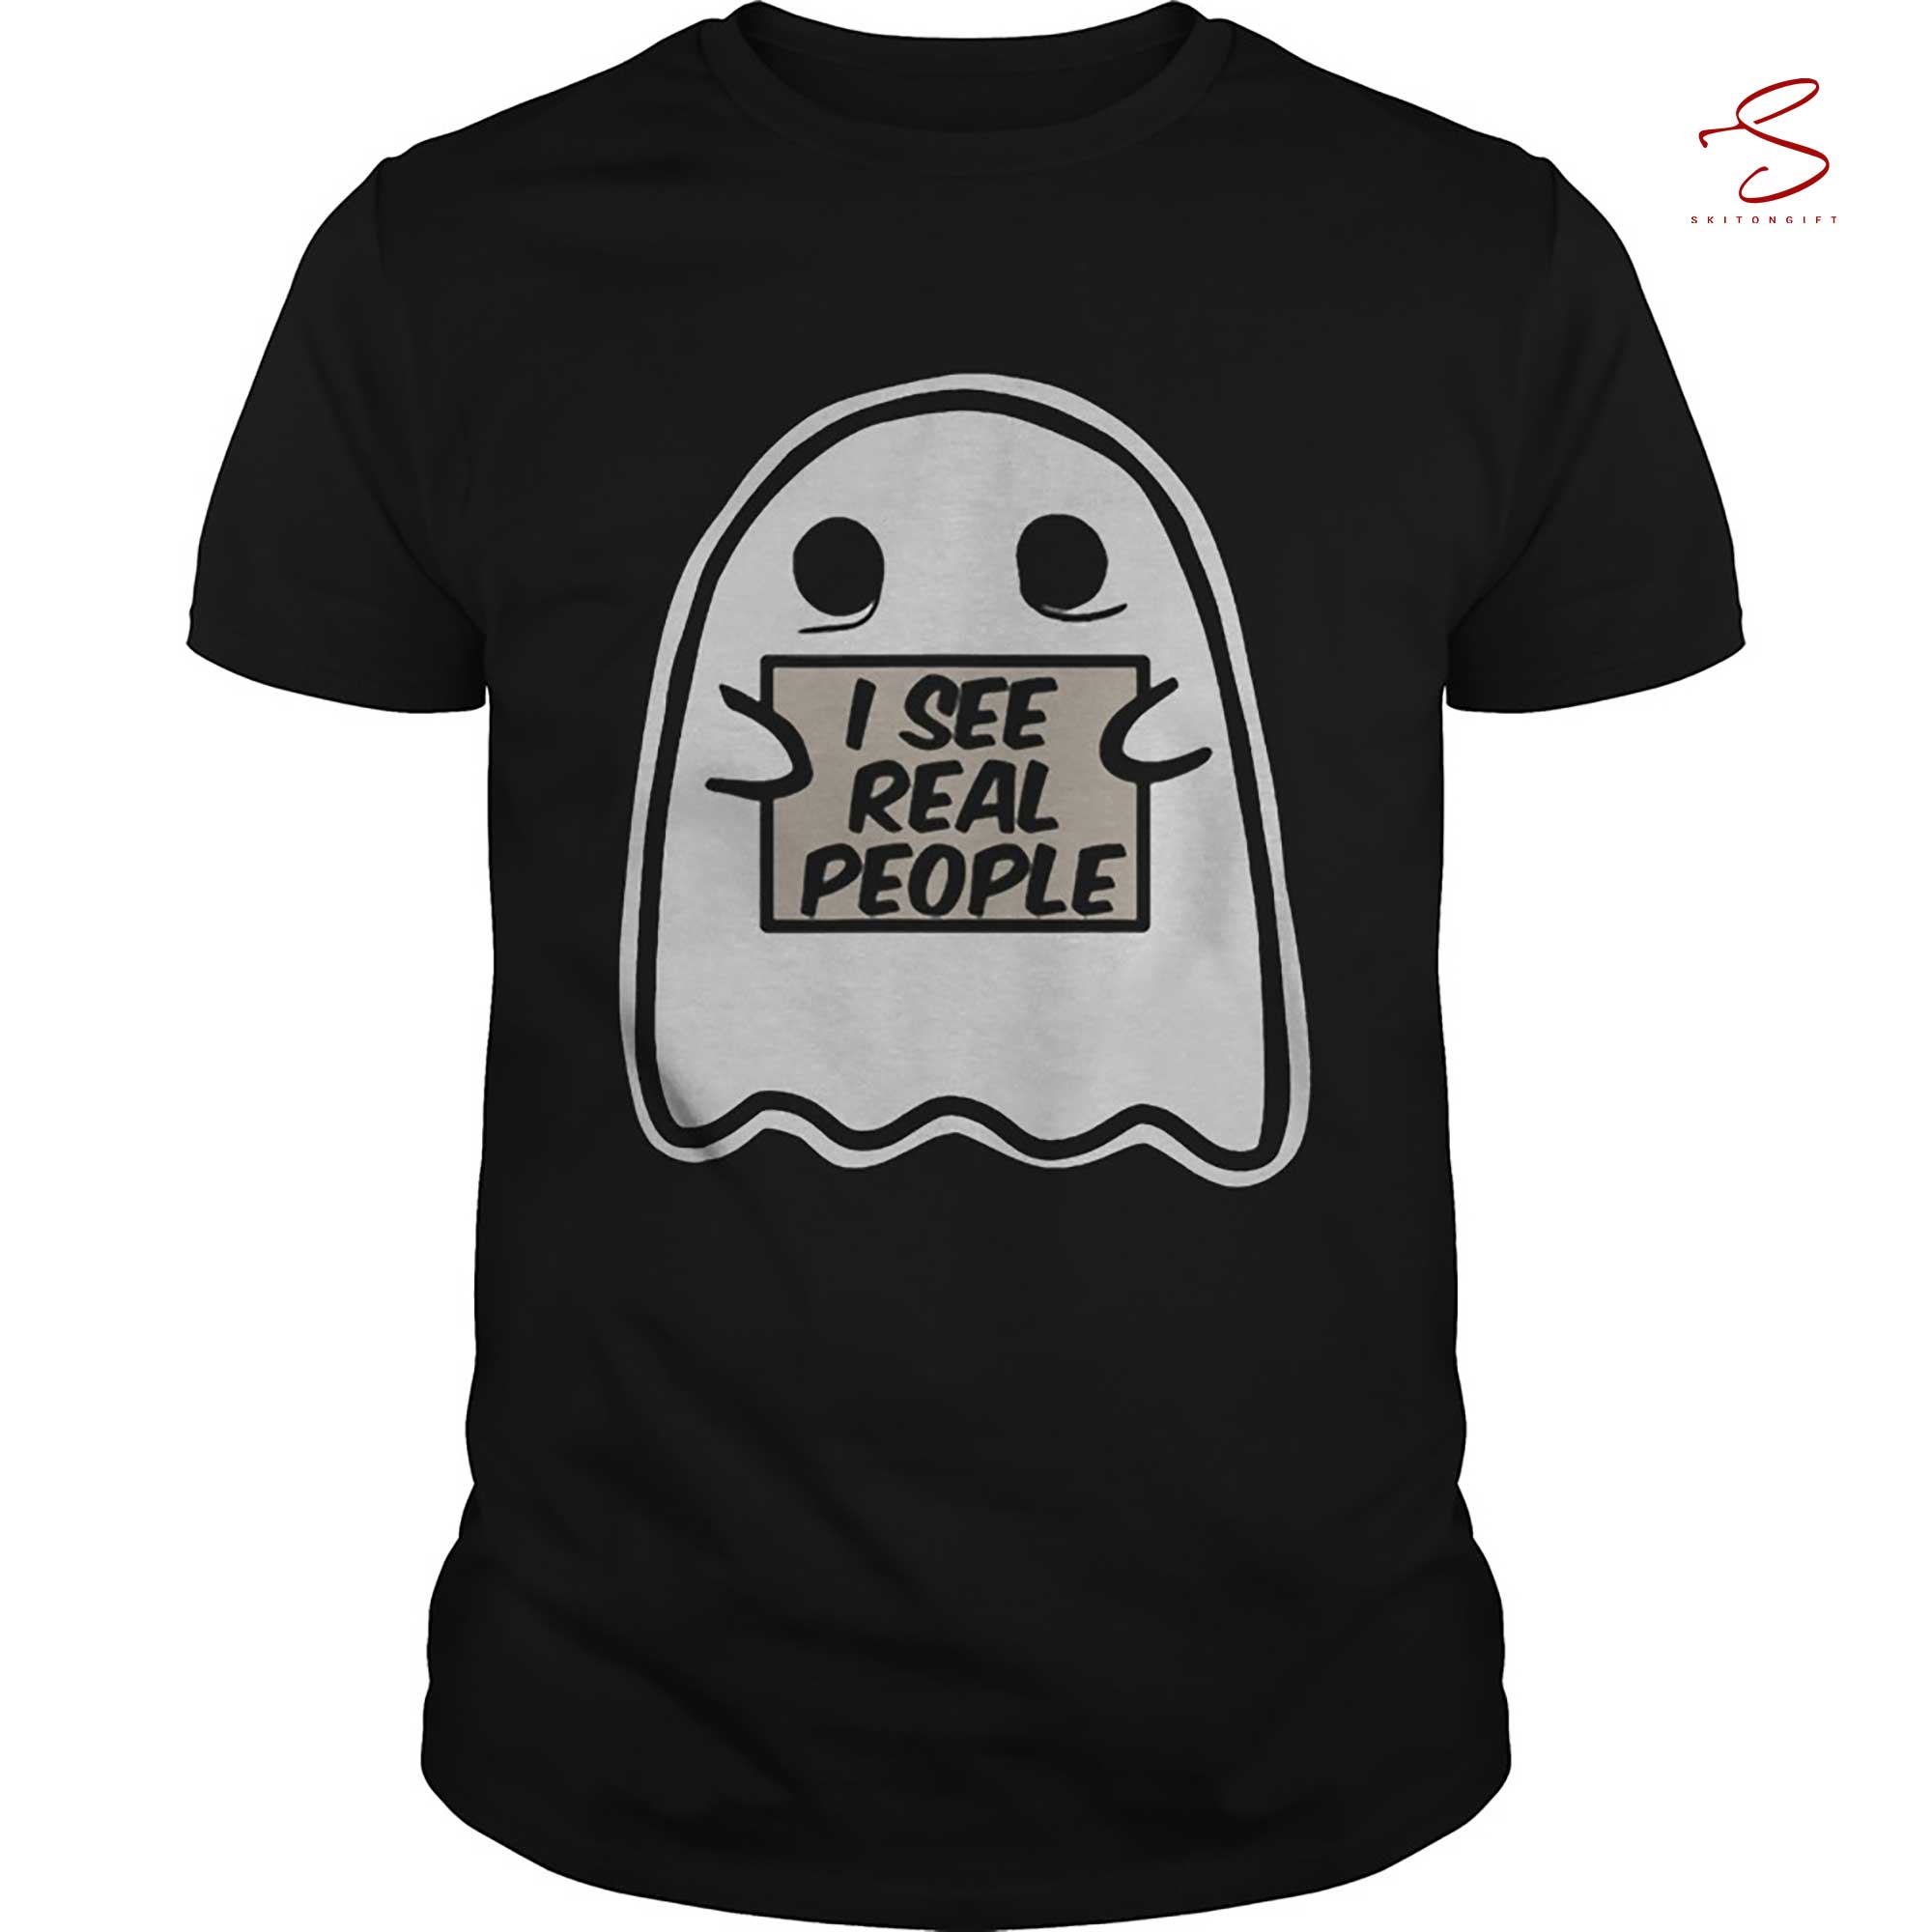 Skitongift I See Real People Funny Halloween Ghost T Shirt